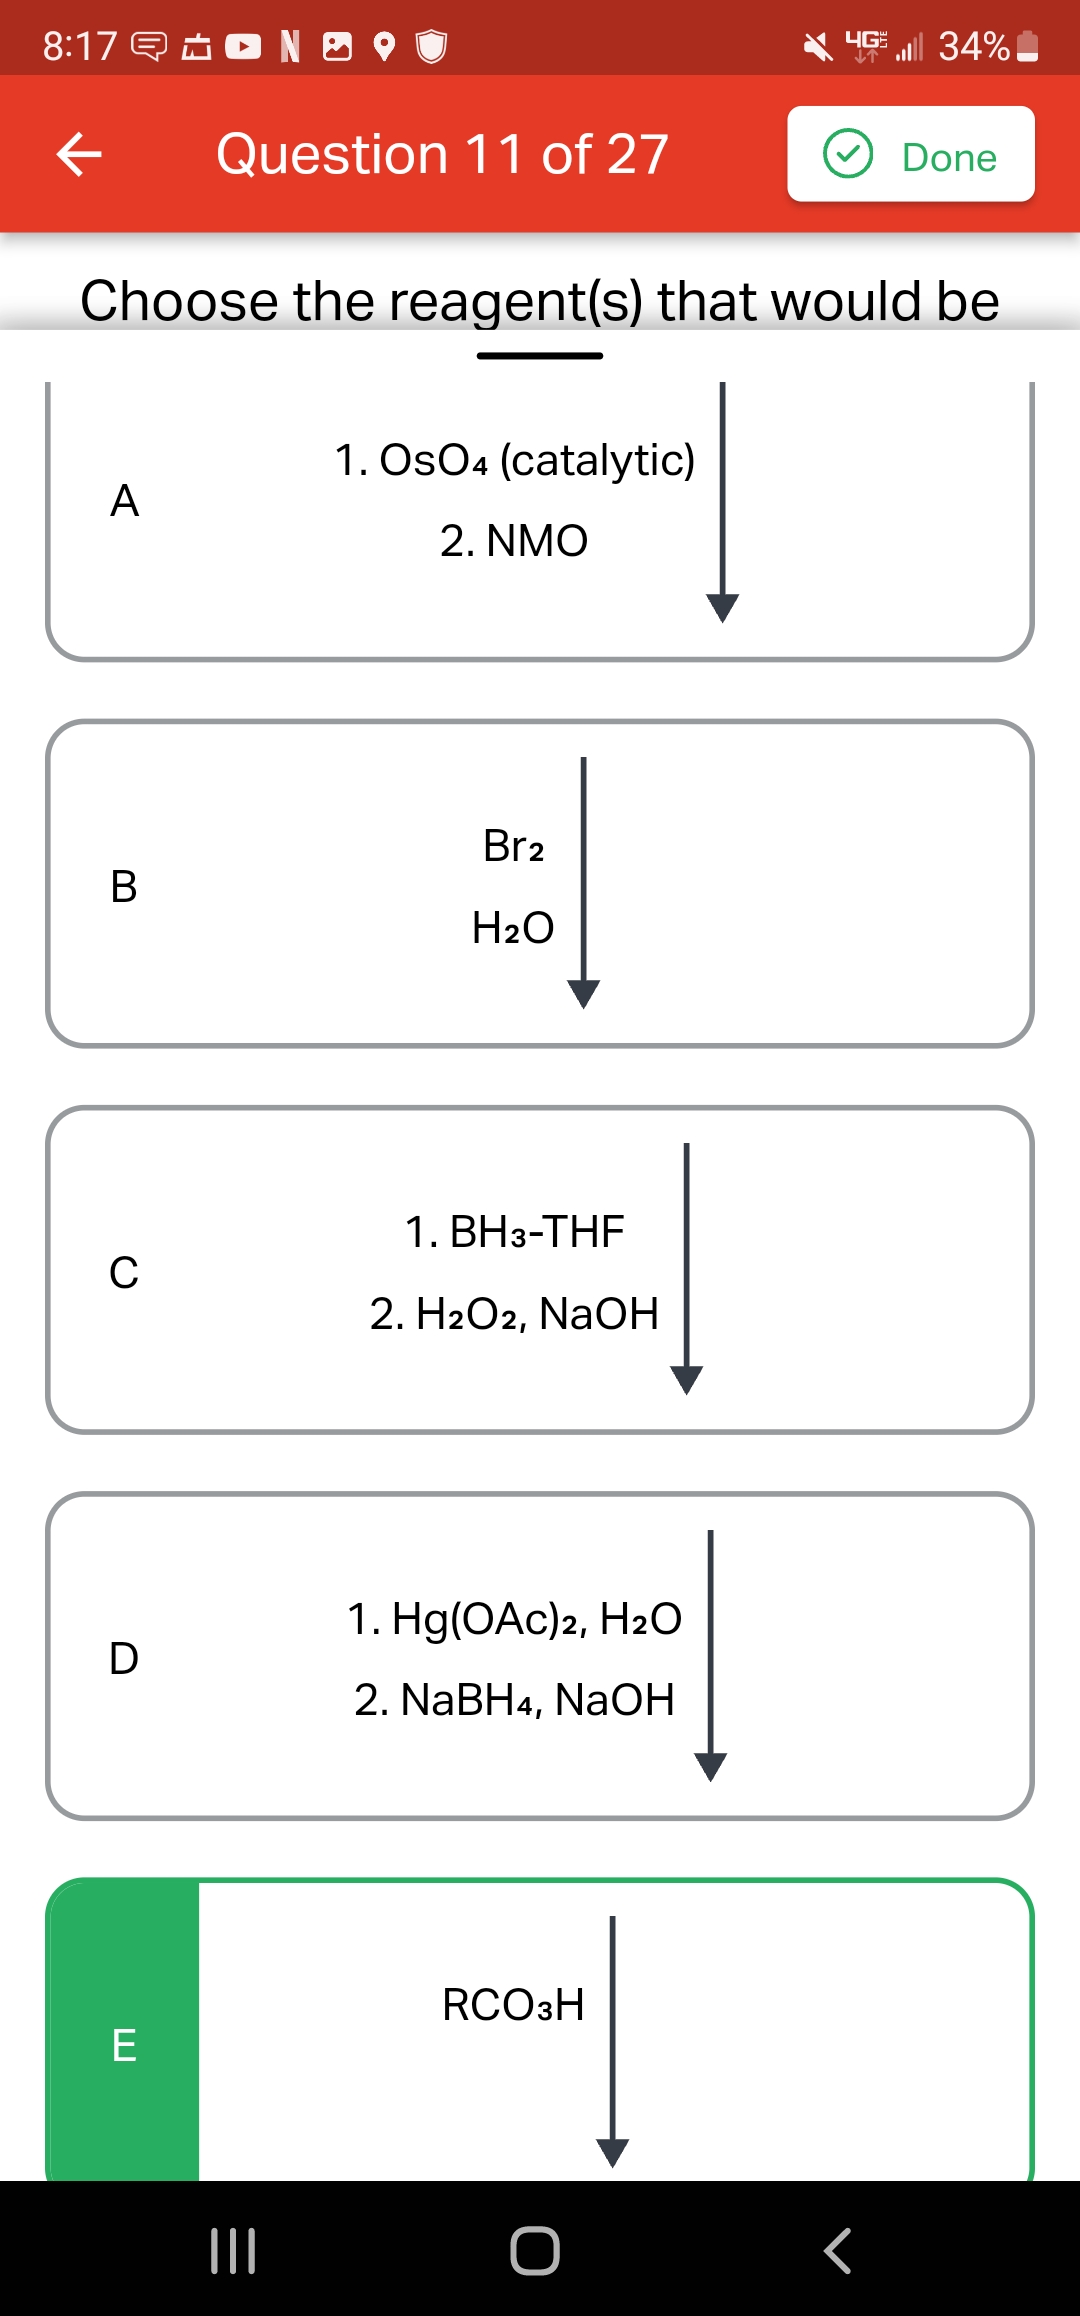 8:17N9
←
A
B
Choose the reagent(s) that would be
C
D
Question 11 of 27
E
|||
1. OsO4 (catalytic)
2. NMO
Br2
H₂O
1. BH3-THF
2. H2O2, NaOH
1. Hg(OAc)2, H₂O
2. NaBH4, NaOH
4G 34%
RCO3H
Done
r